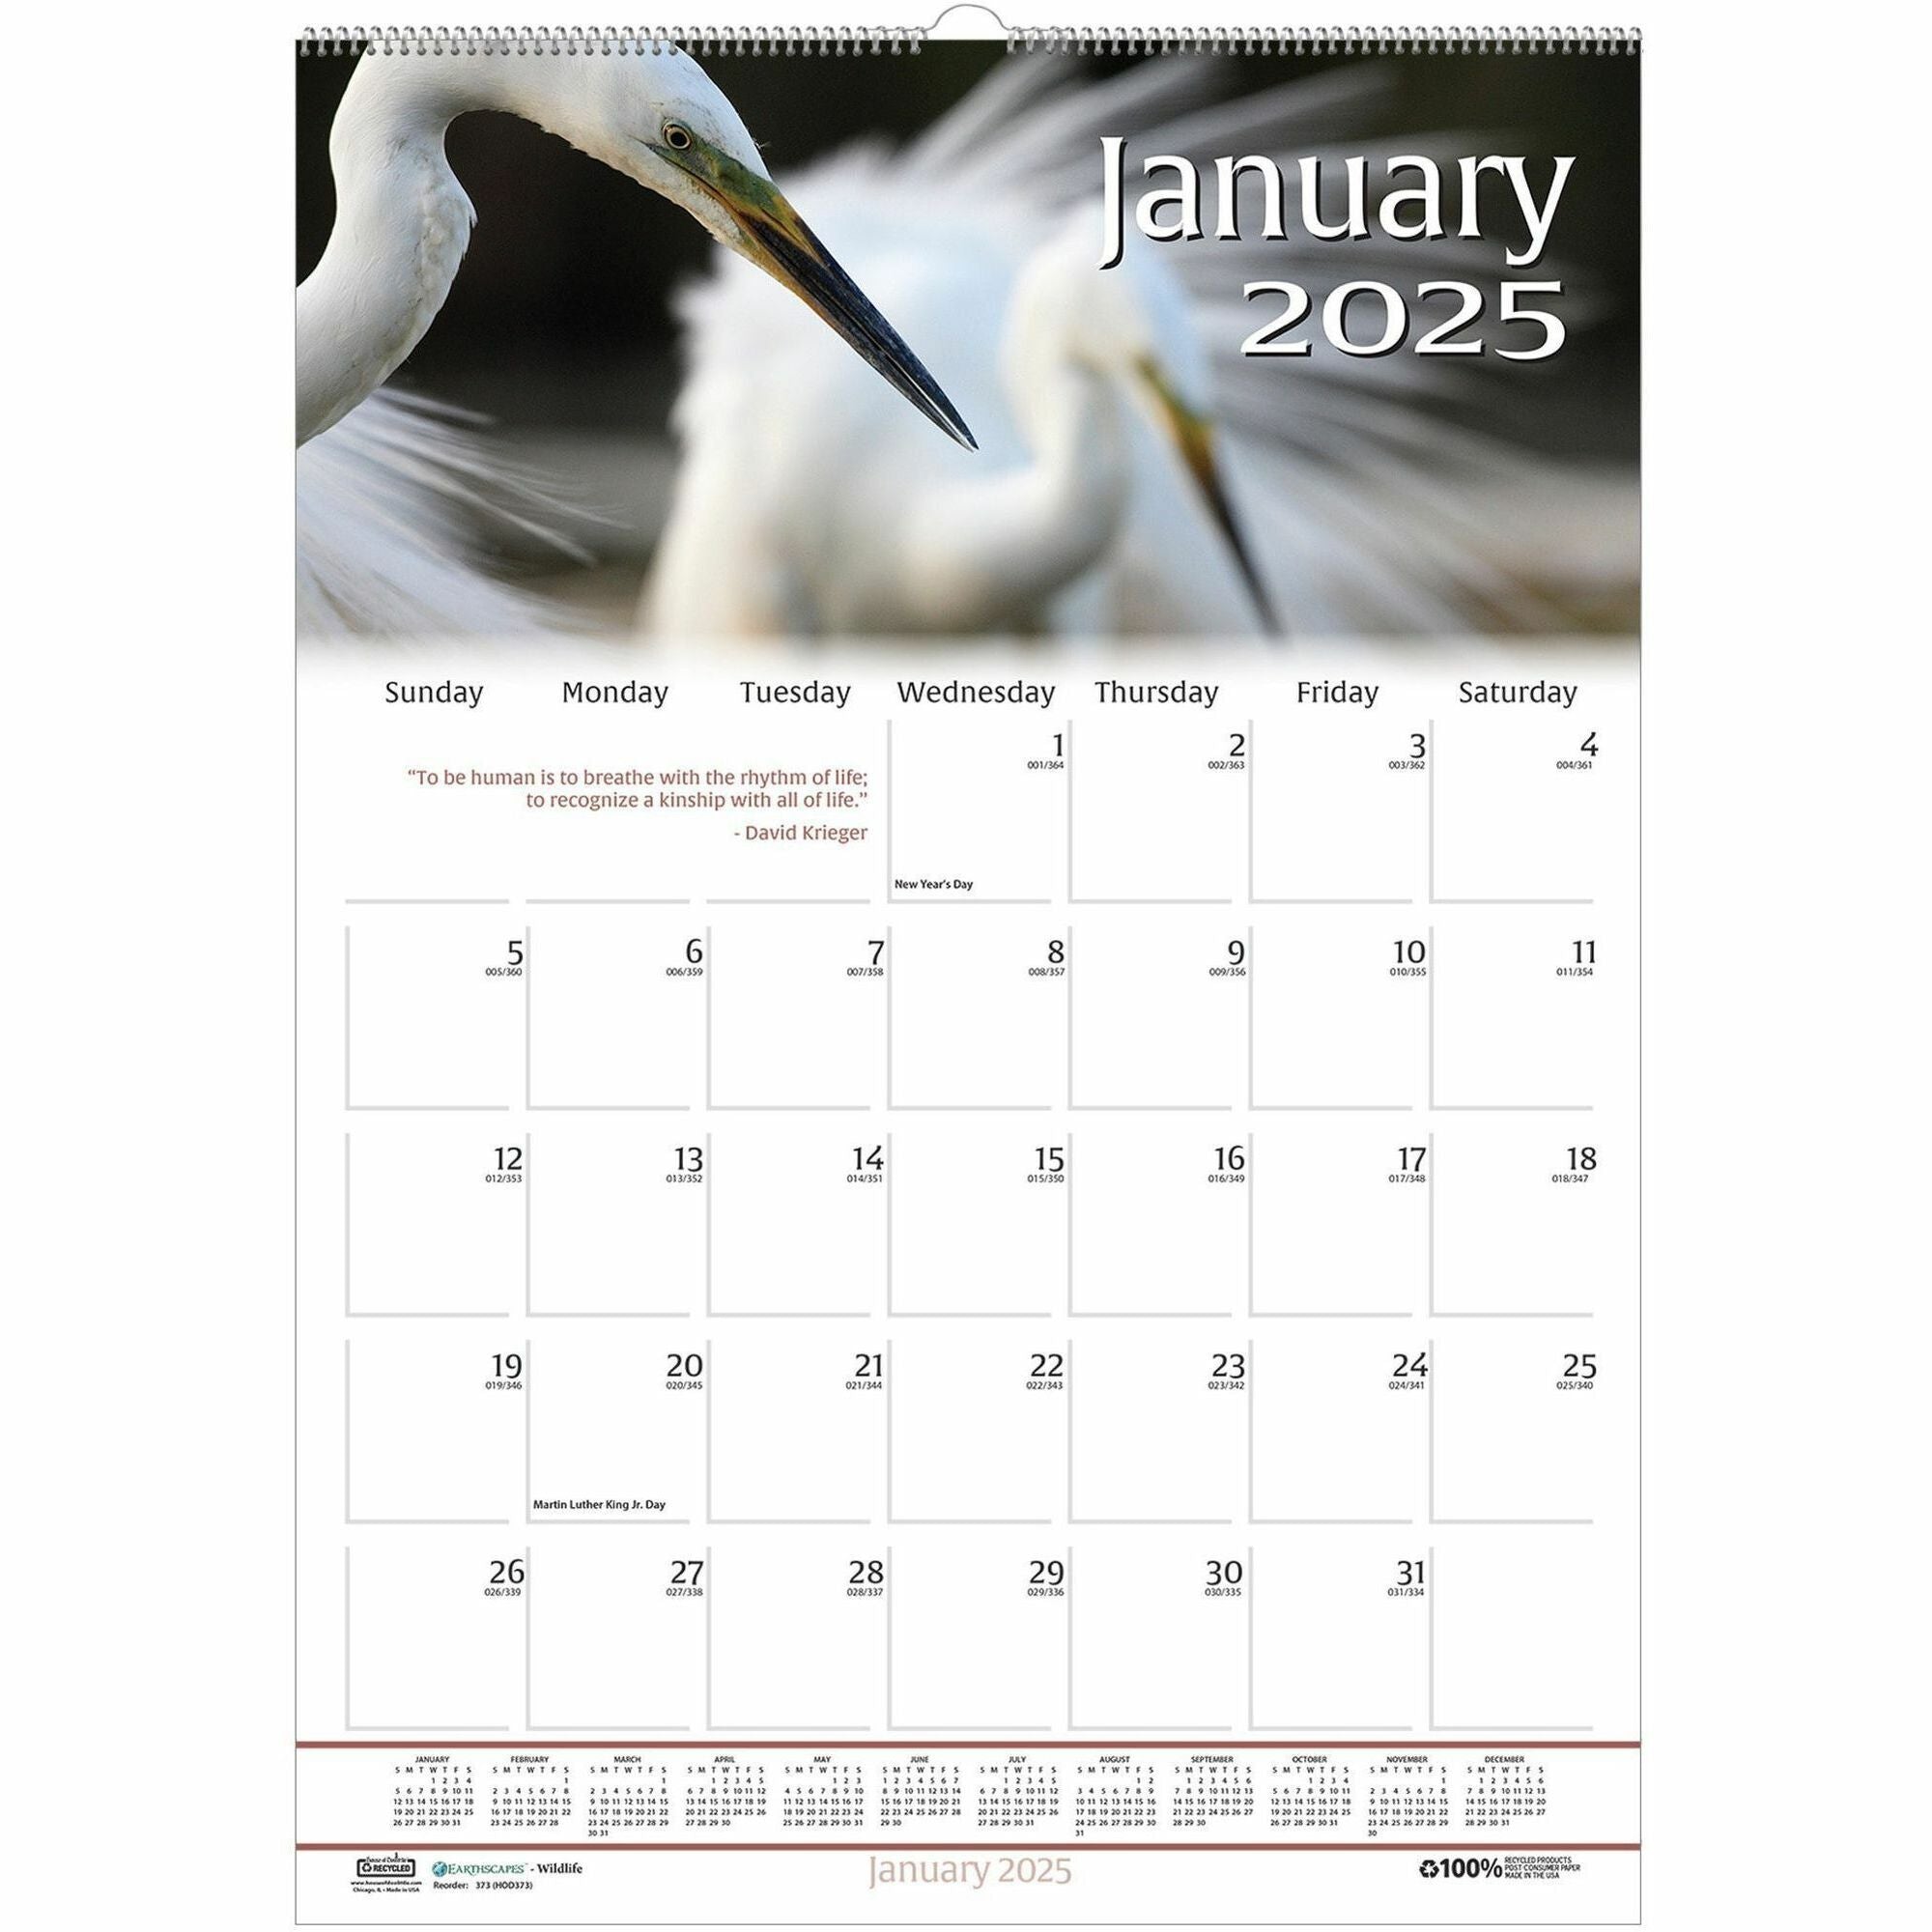 house-of-doolittle-earthscapes-wildlife-monthly-wall-calendar-julian-dates-monthly-12-month-january-2024-december-2024-1-month-single-page-layout-12-x-16-1-2-sheet-size-163-x-2-block-wire-bound-1-each_hod3732 - 1